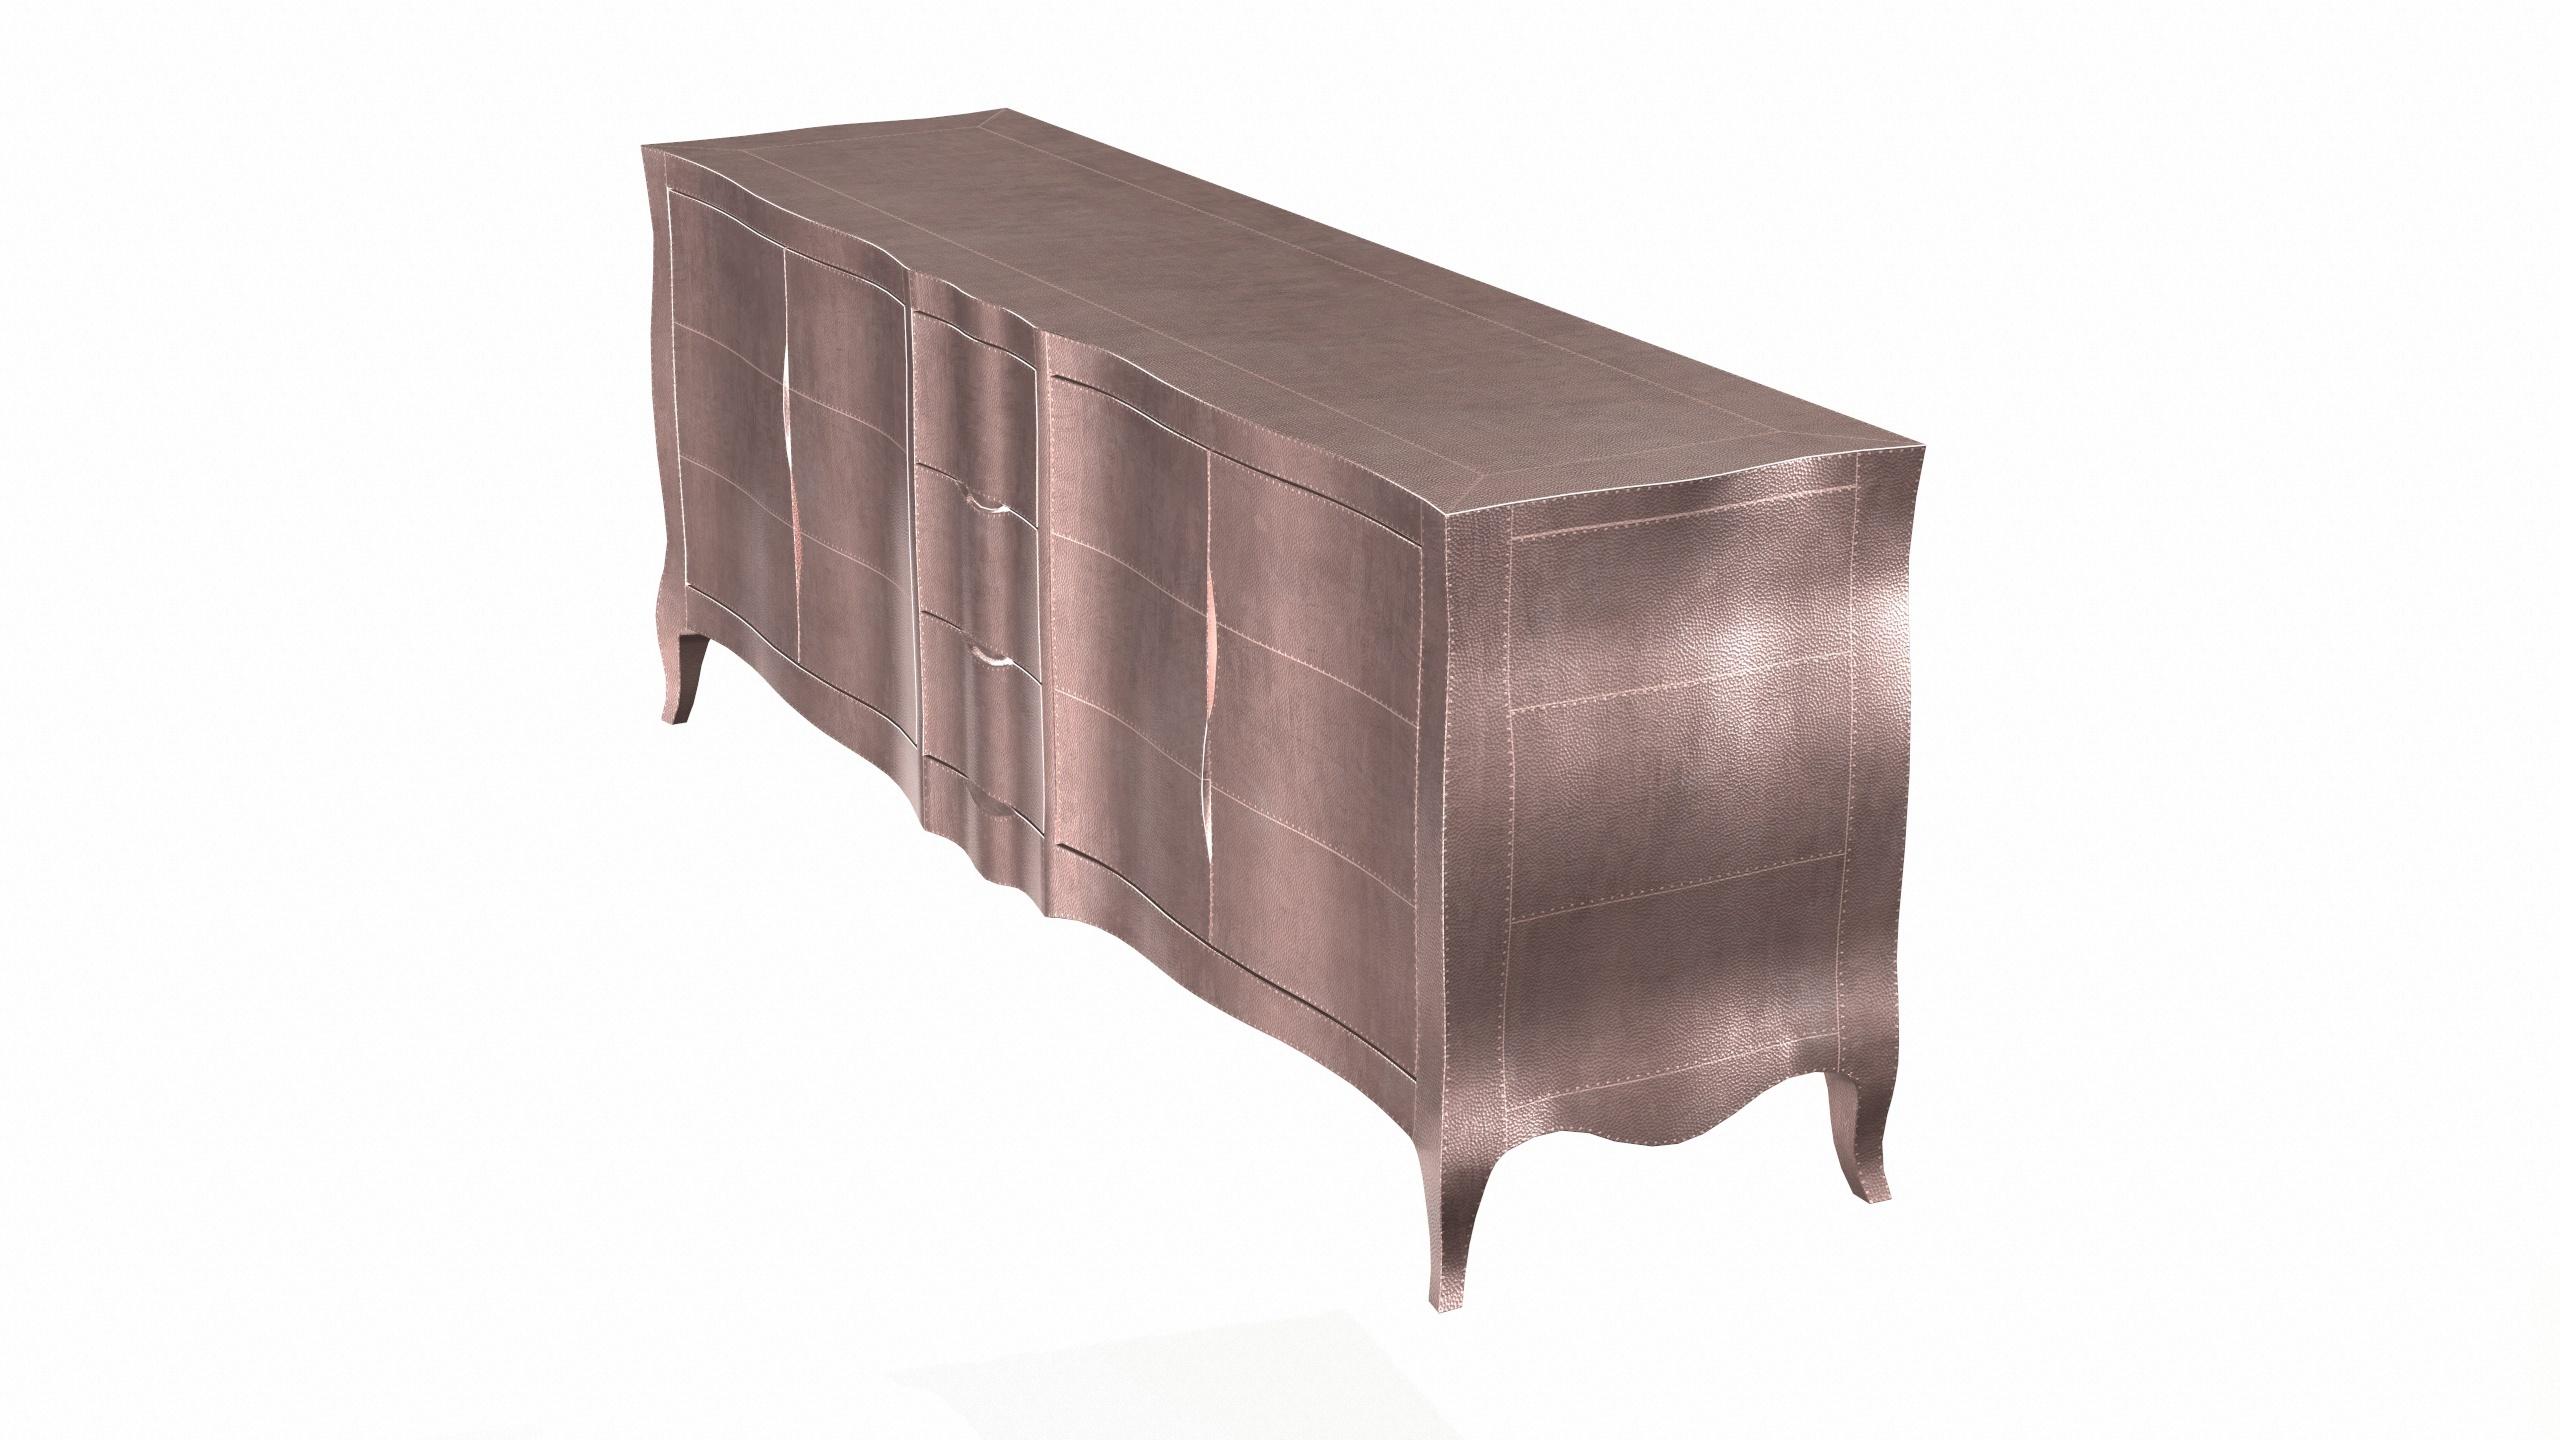 Hand-Carved Louise Credenza Art Deco Sideboards in Mid. Hammered Copper by Paul Mathieu For Sale